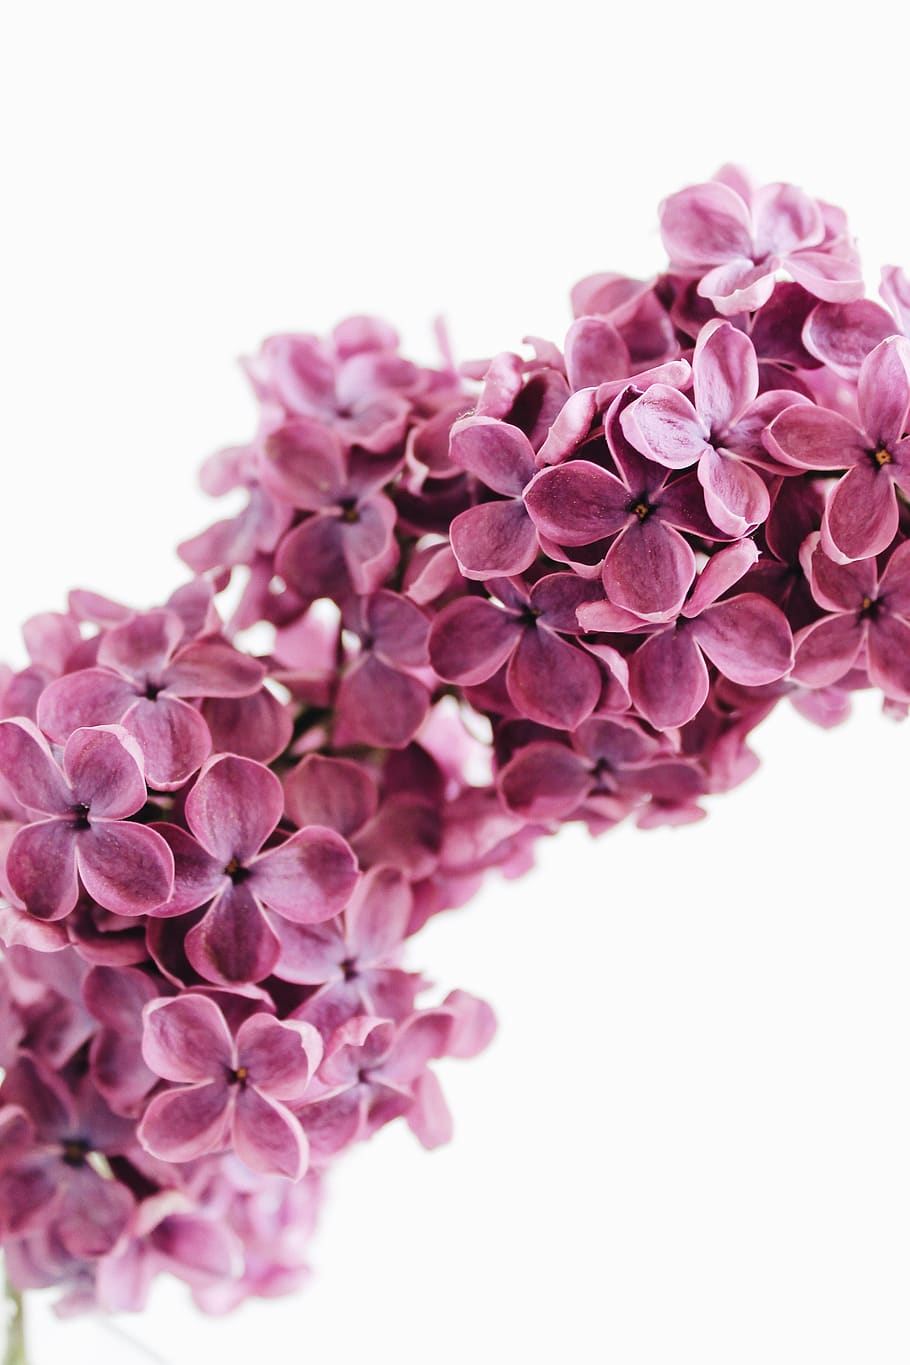 lilac, purple, violet, pink, may, flowers, spring, nature, flora, plant